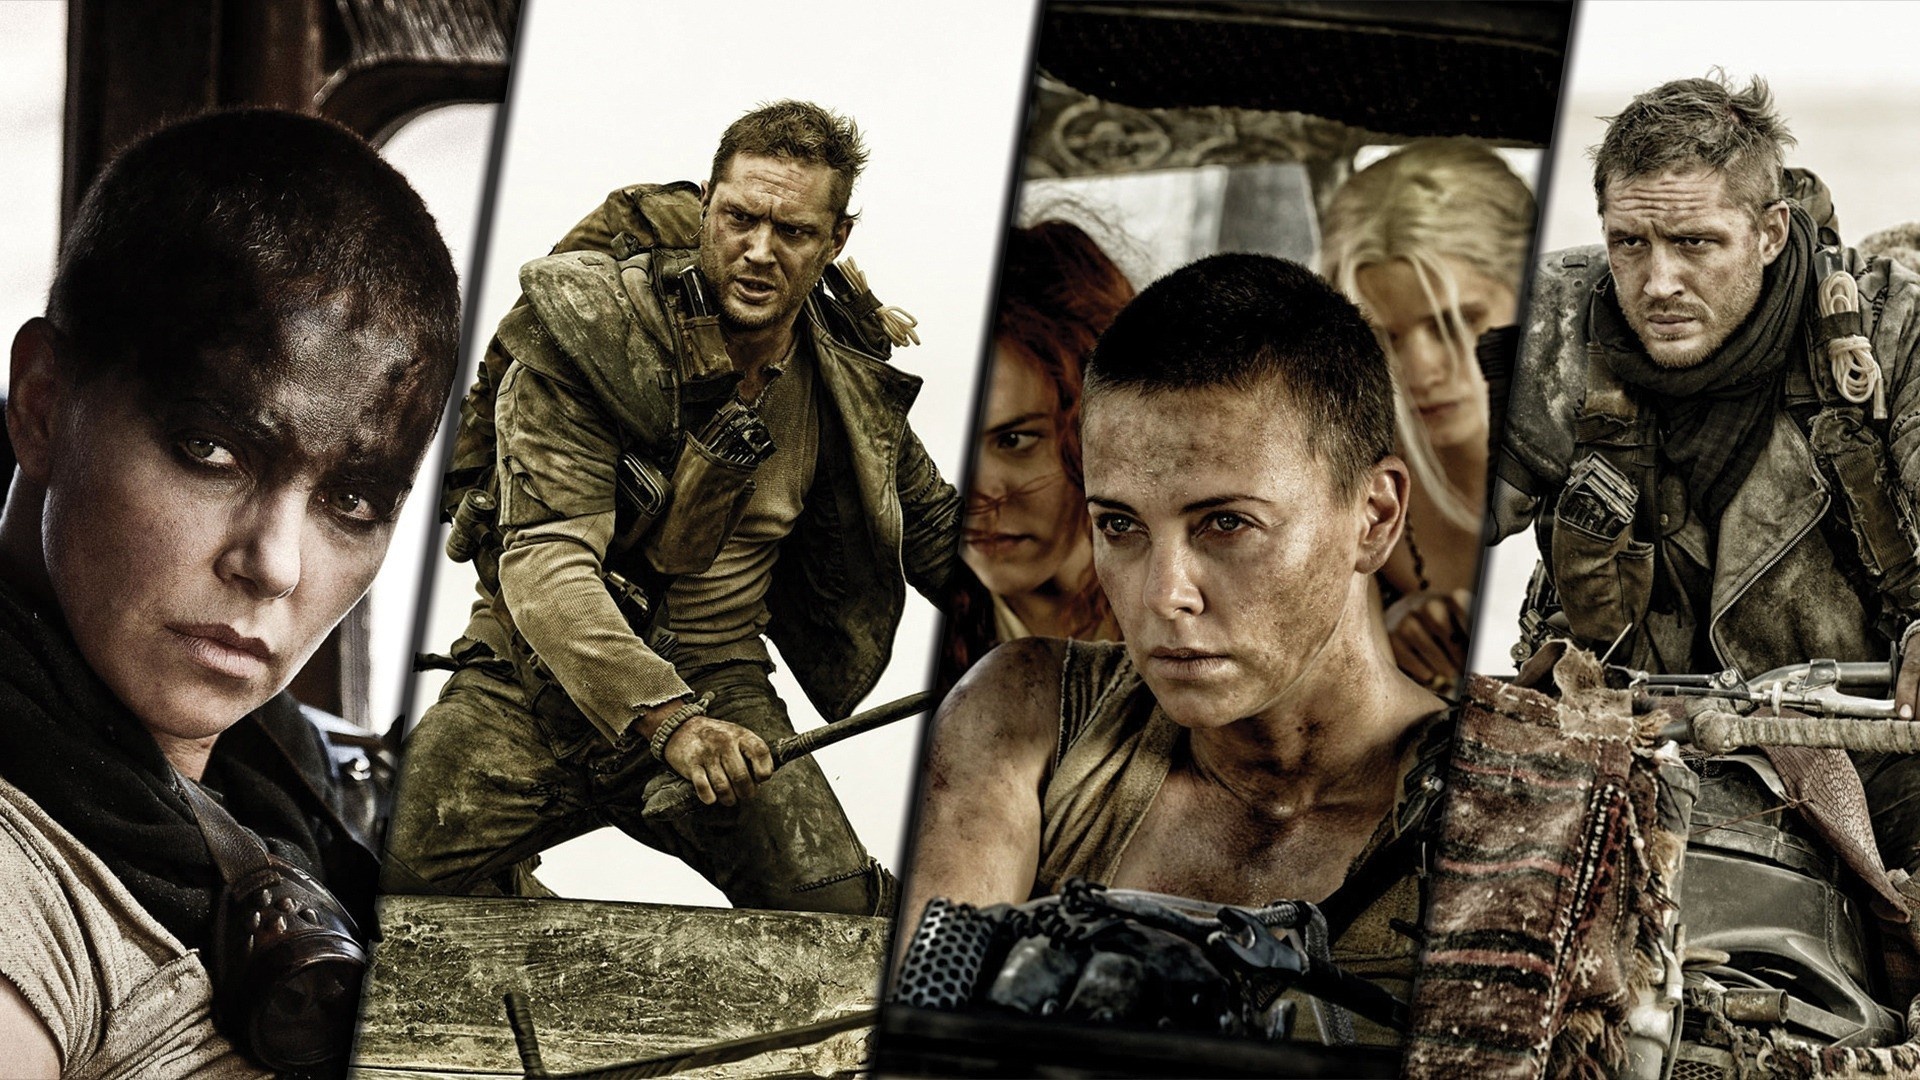 Mad Max: Tom Hardy stars as the titular character alongside Charlize Theron as Imperator Furiosa. 1920x1080 Full HD Background.